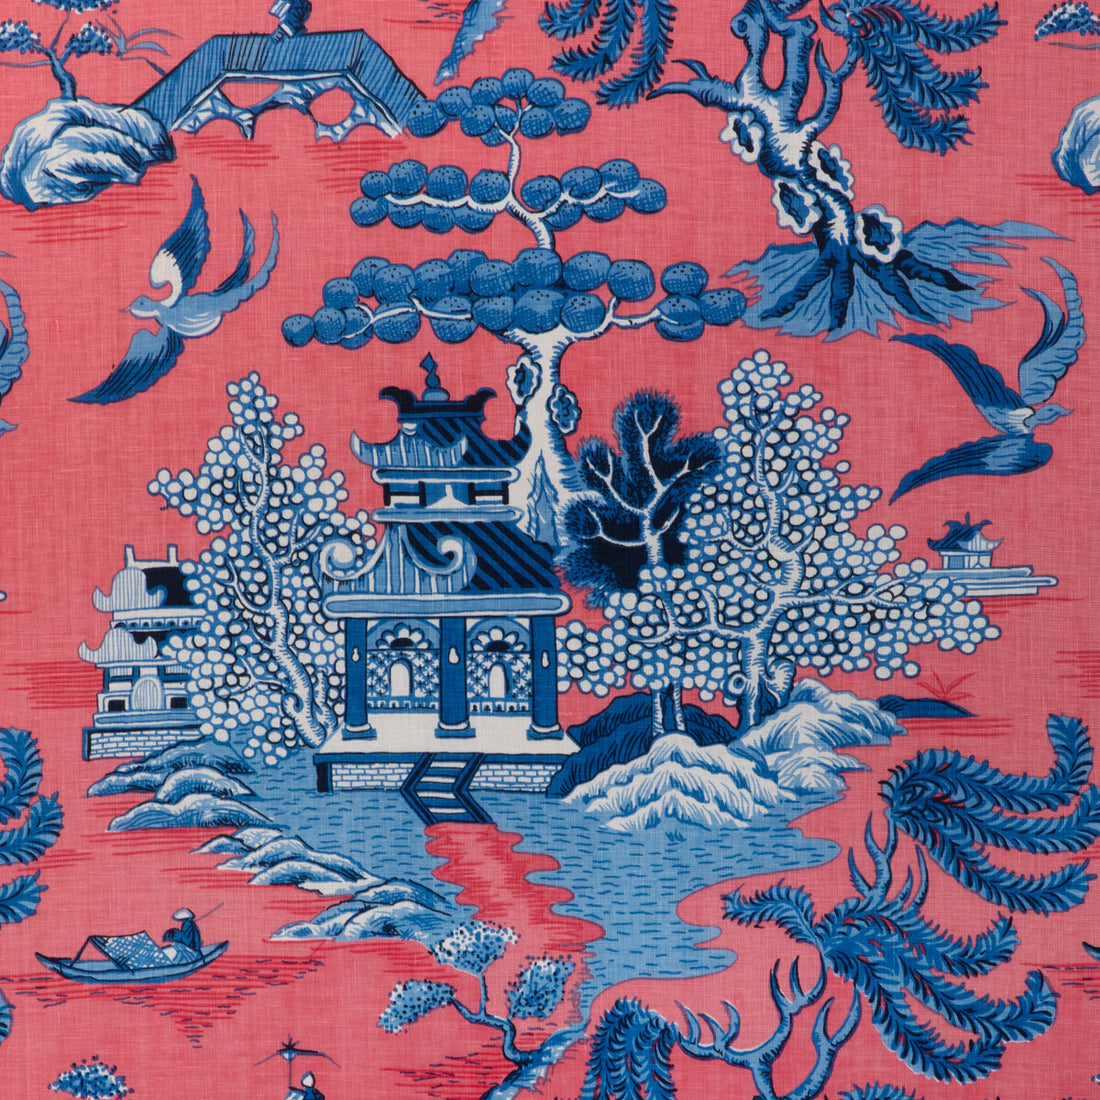 Willow Lake Print fabric in punch color - pattern 2023128.195.0 - by Lee Jofa in the Lee Jofa 200 collection